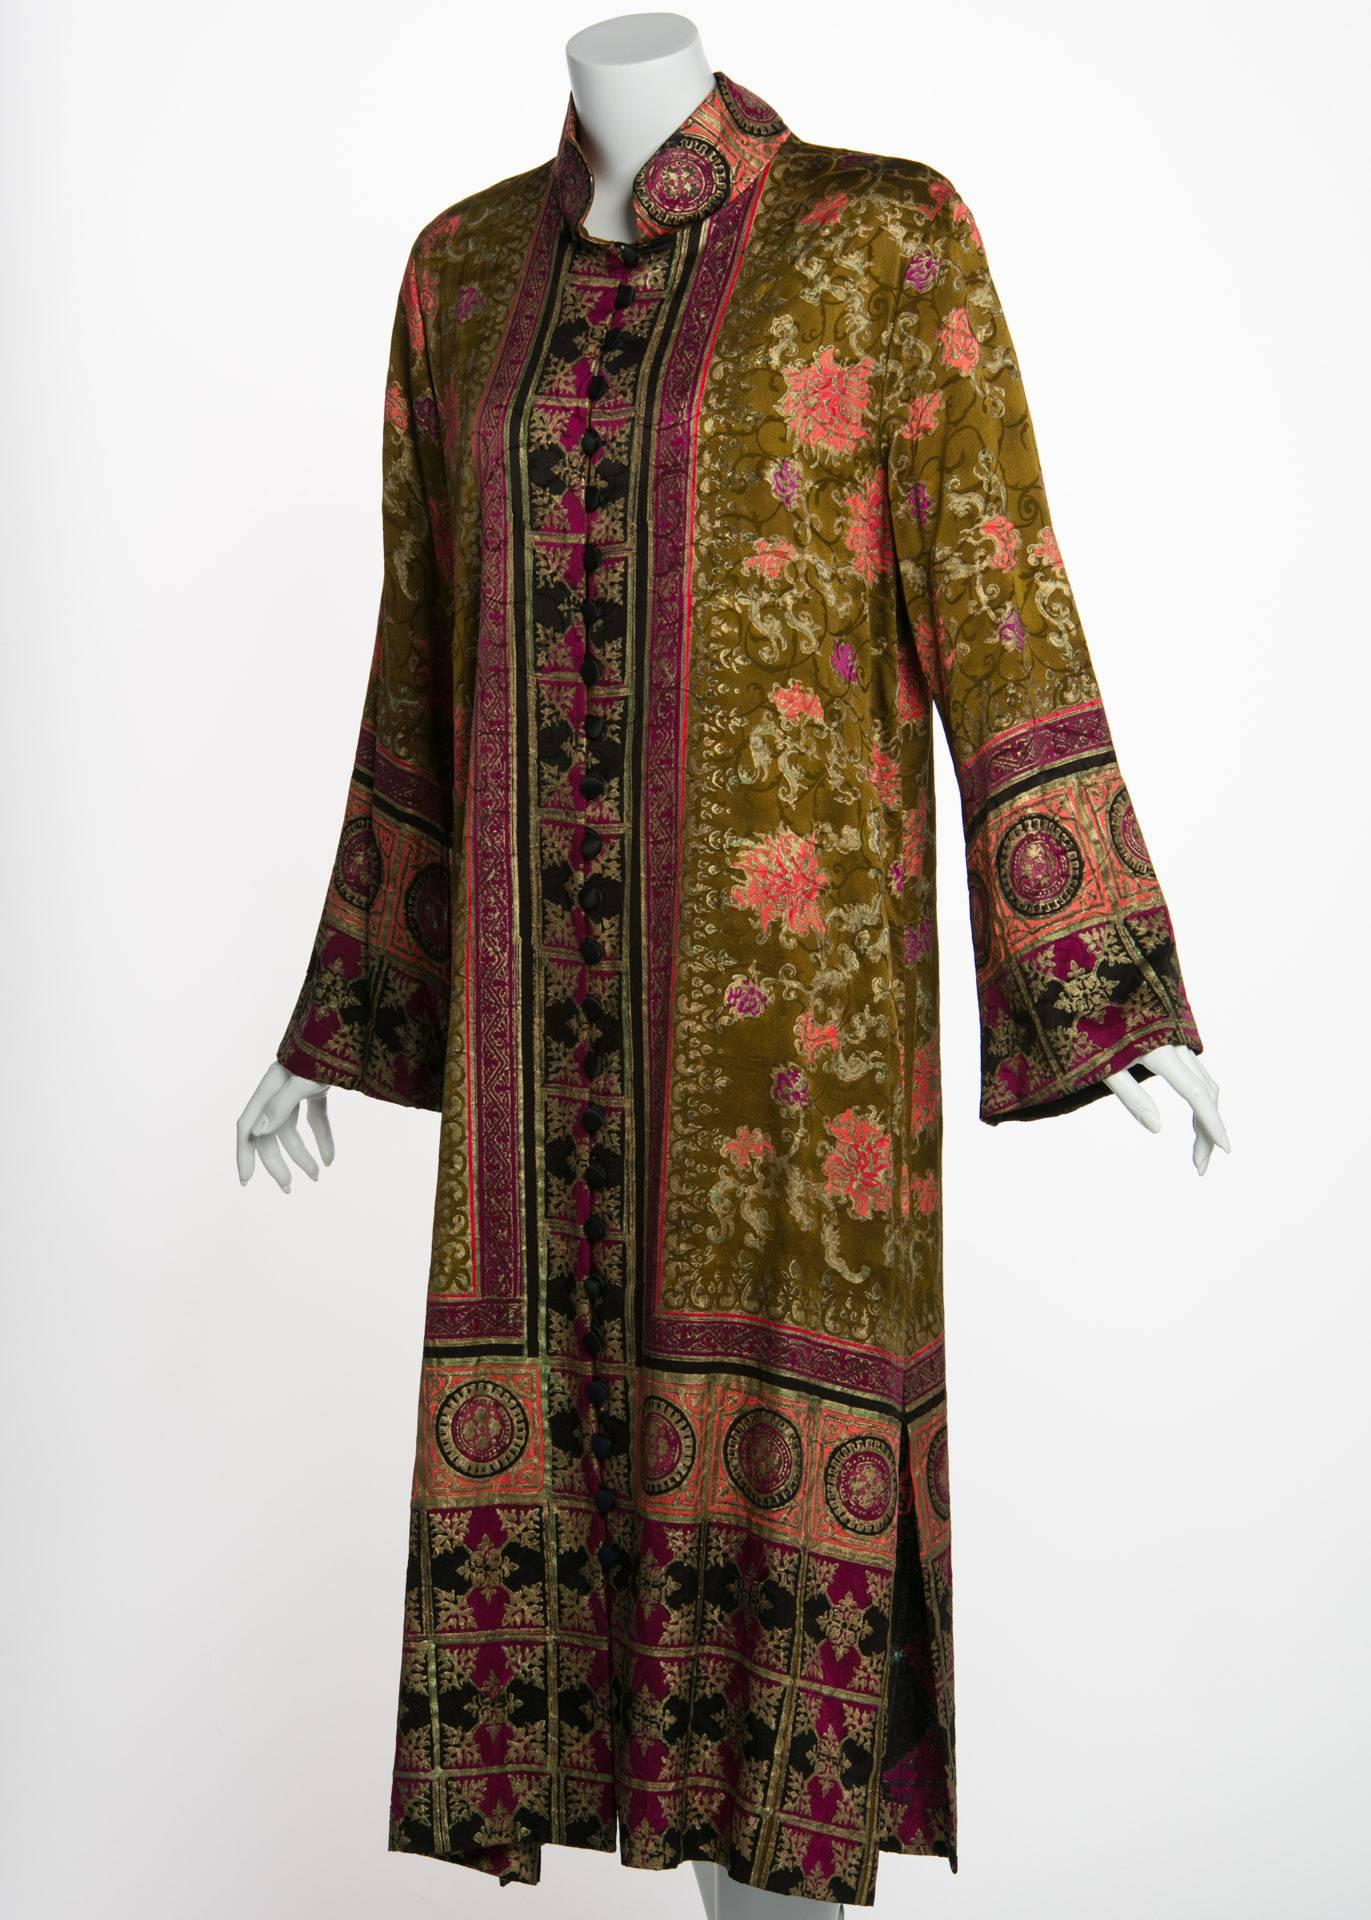 Dating back hundreds of years, block printing is one of the earliest technologies for creating textile surface design. The high level of skill required in even block placement and inking is astoundingly evident in this silk caftan by American